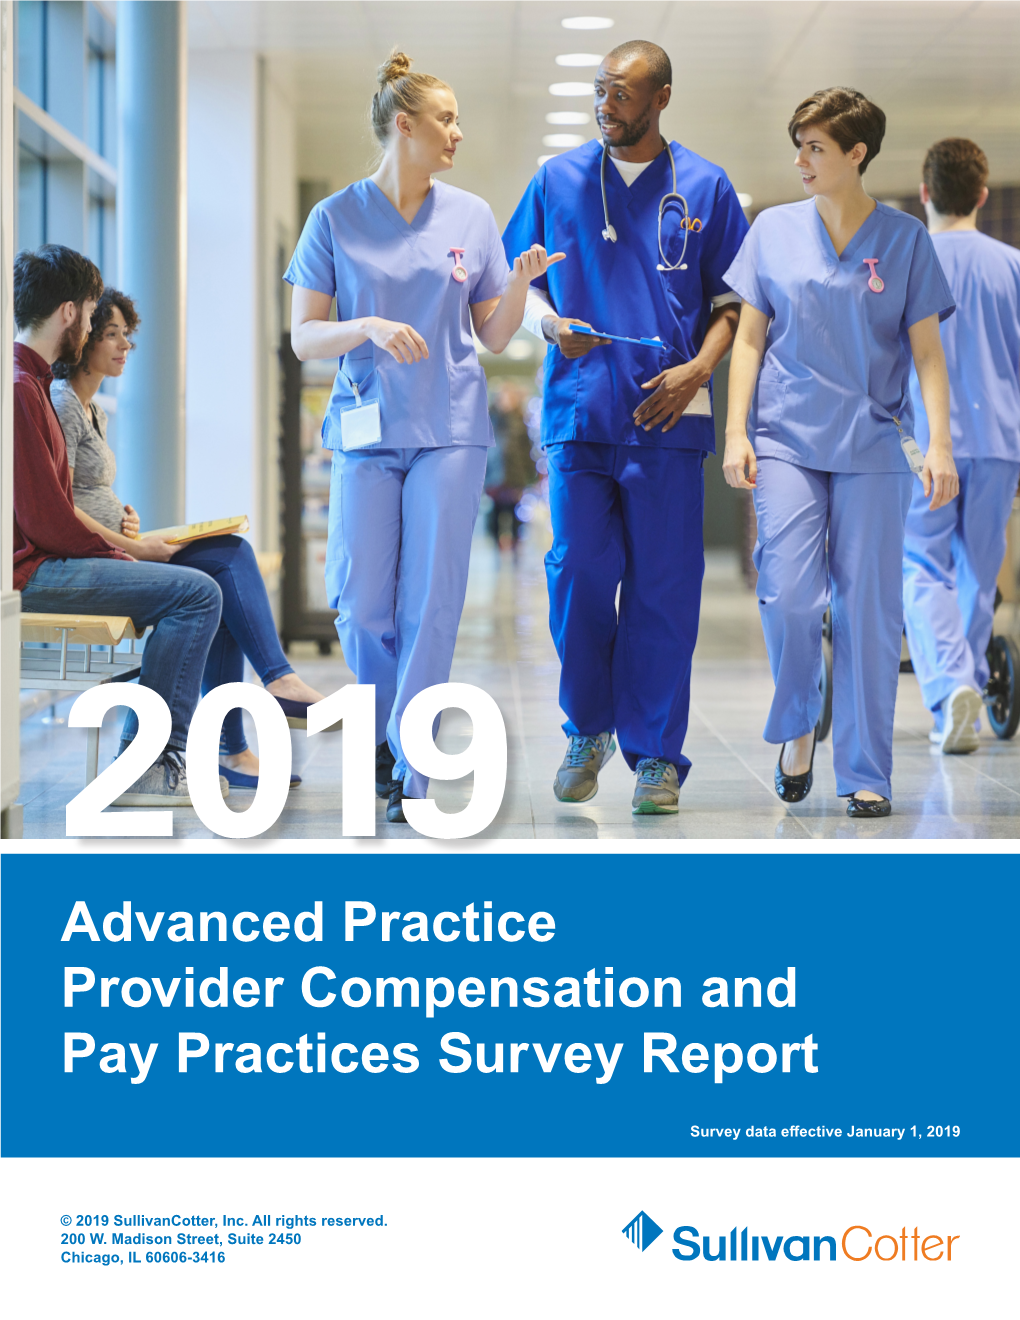 Advanced Practice Provider Compensation and Pay Practices Survey Report